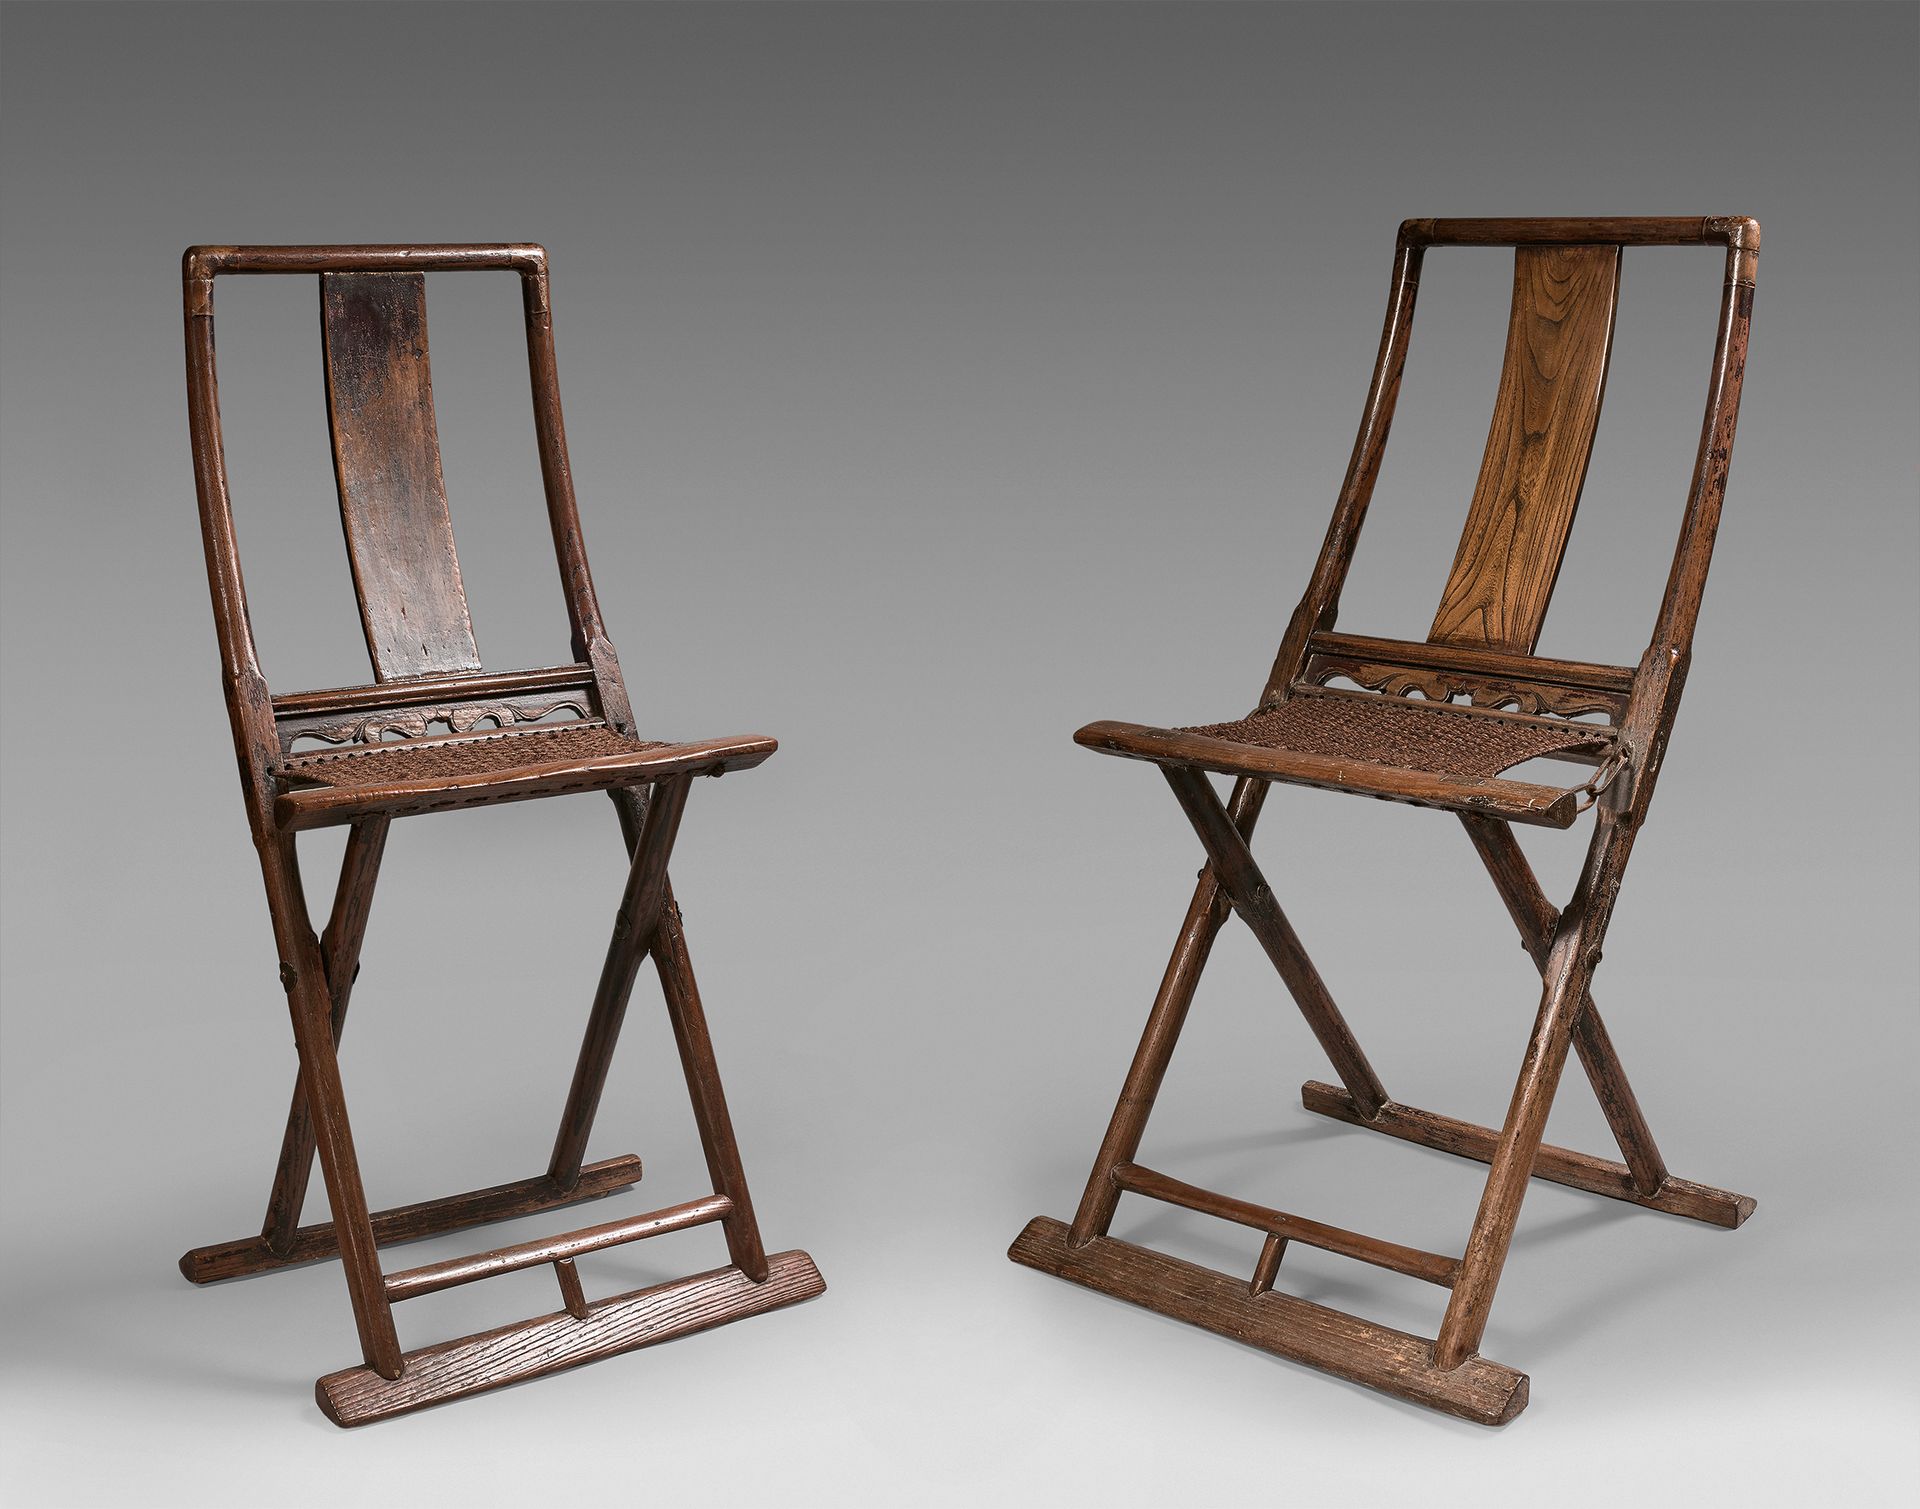 CHINE - Début du XXe siècle Pair of folding chairs in partially red lacquered wo&hellip;